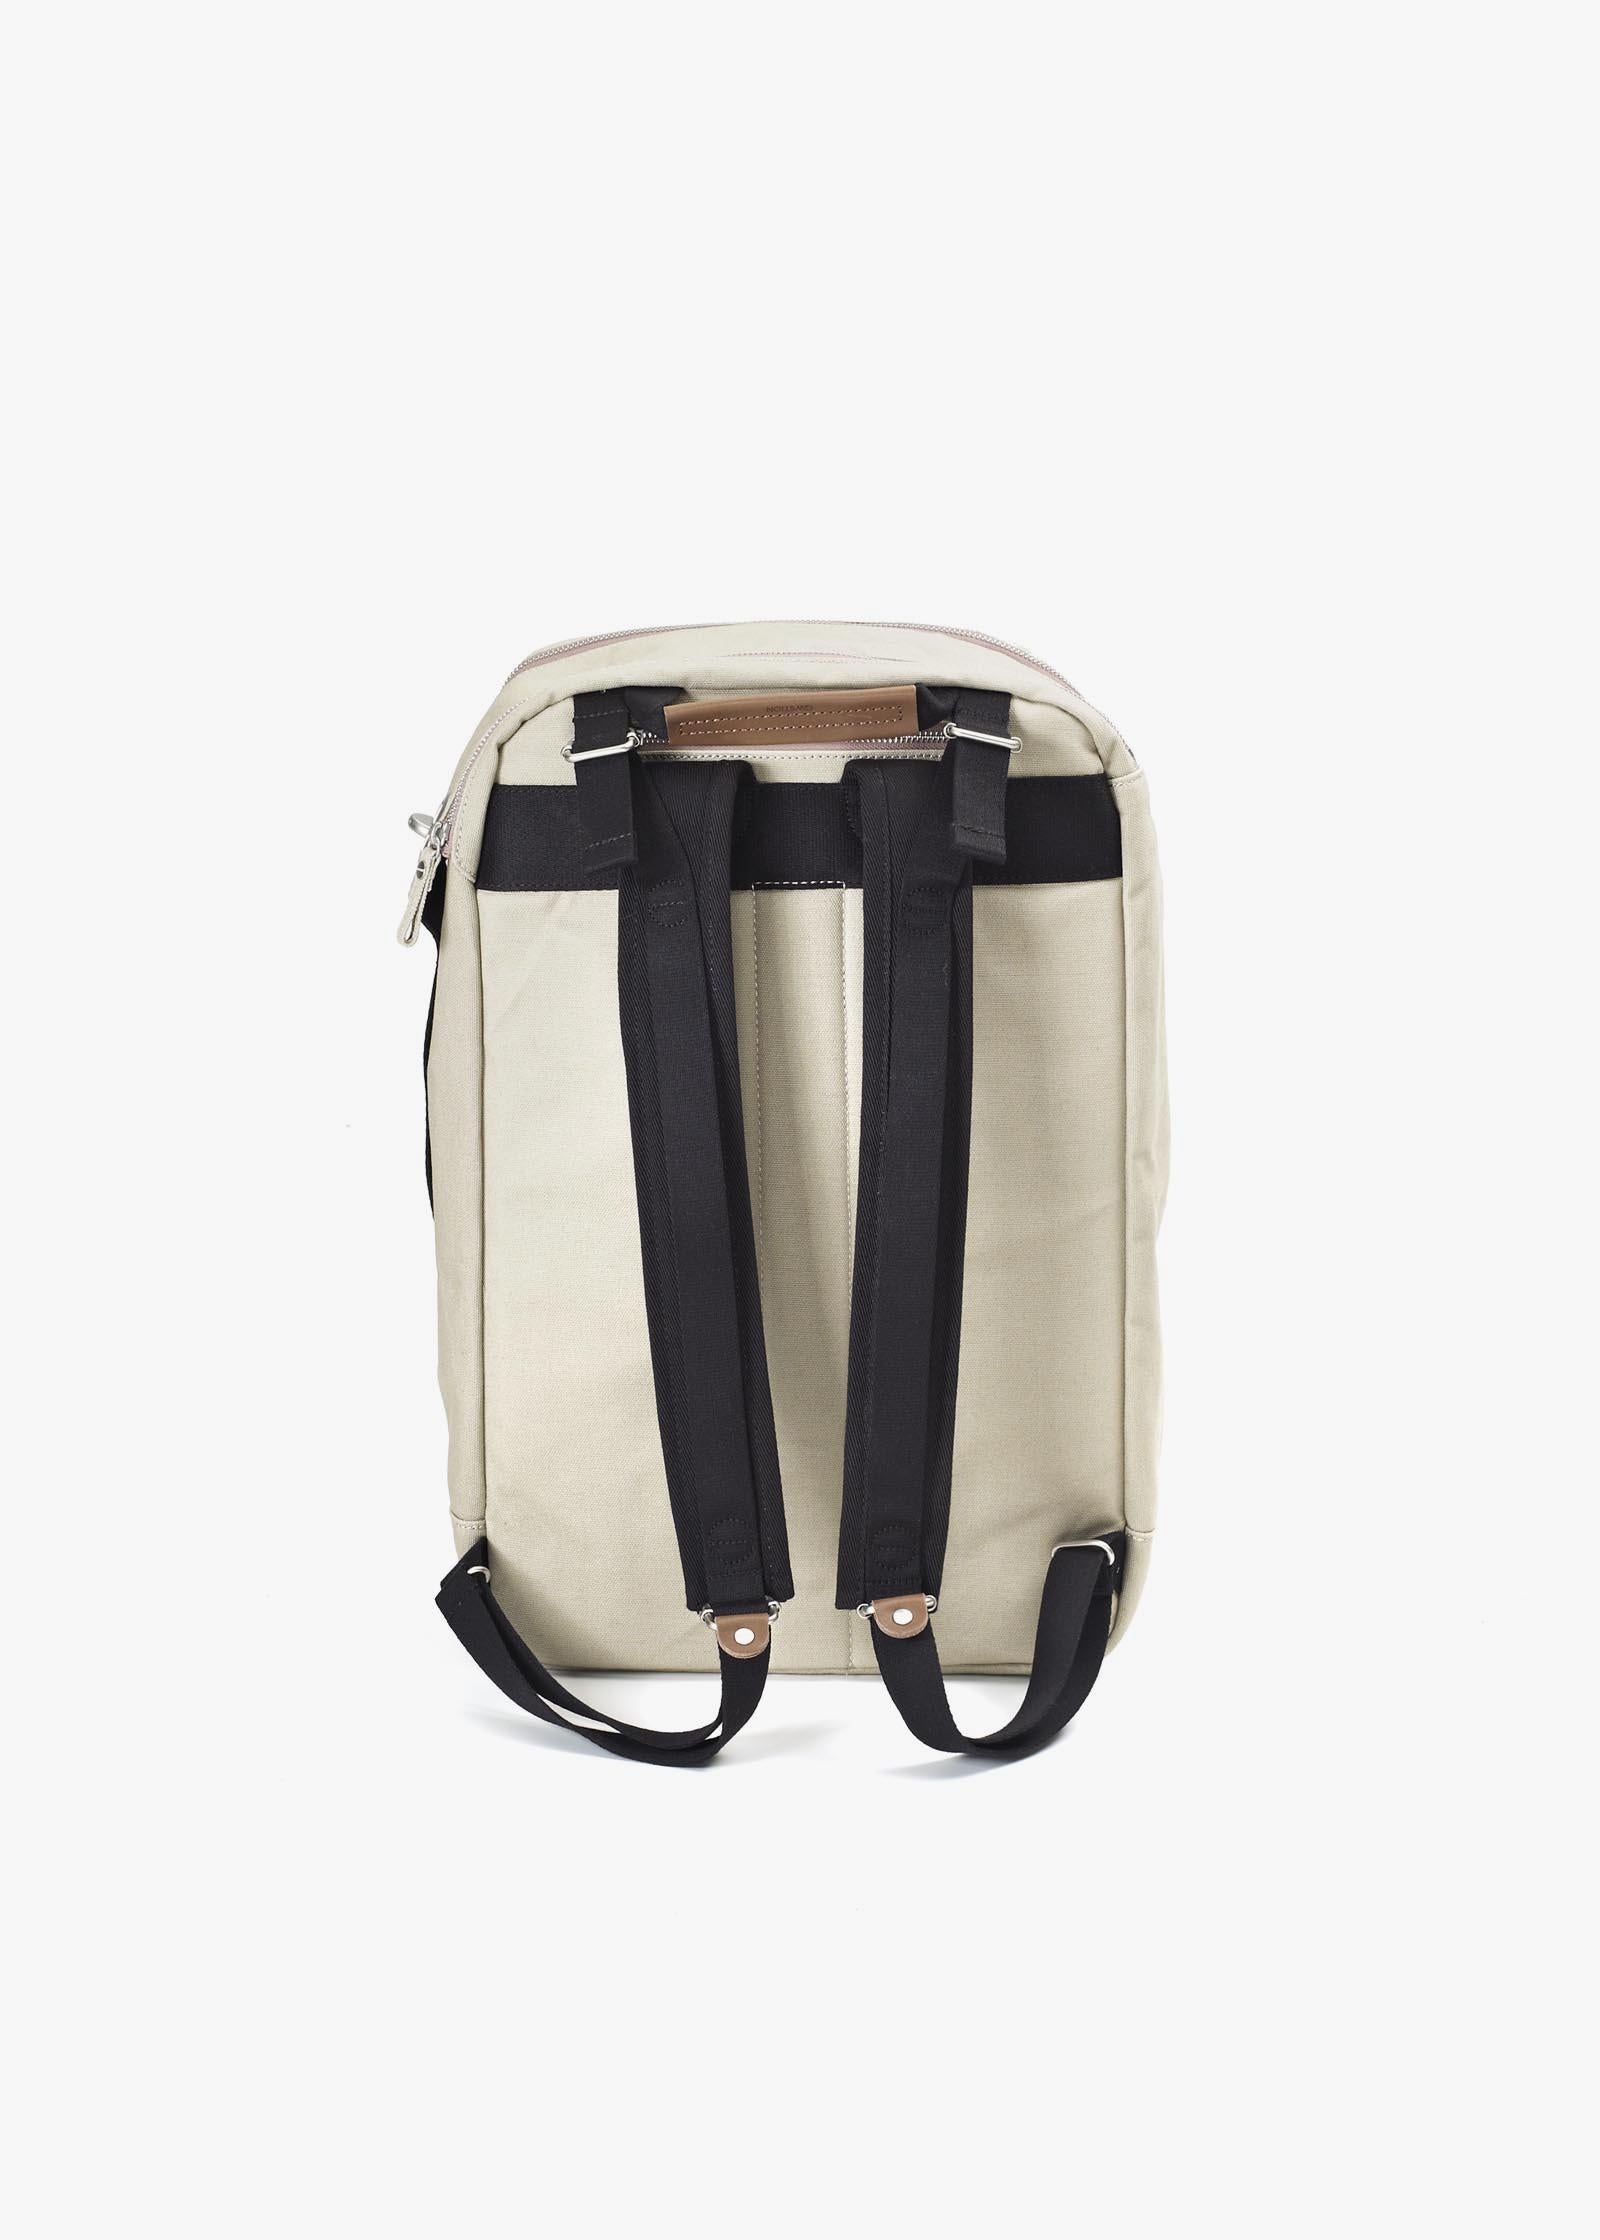 Backpack – Brown Leather Canvas